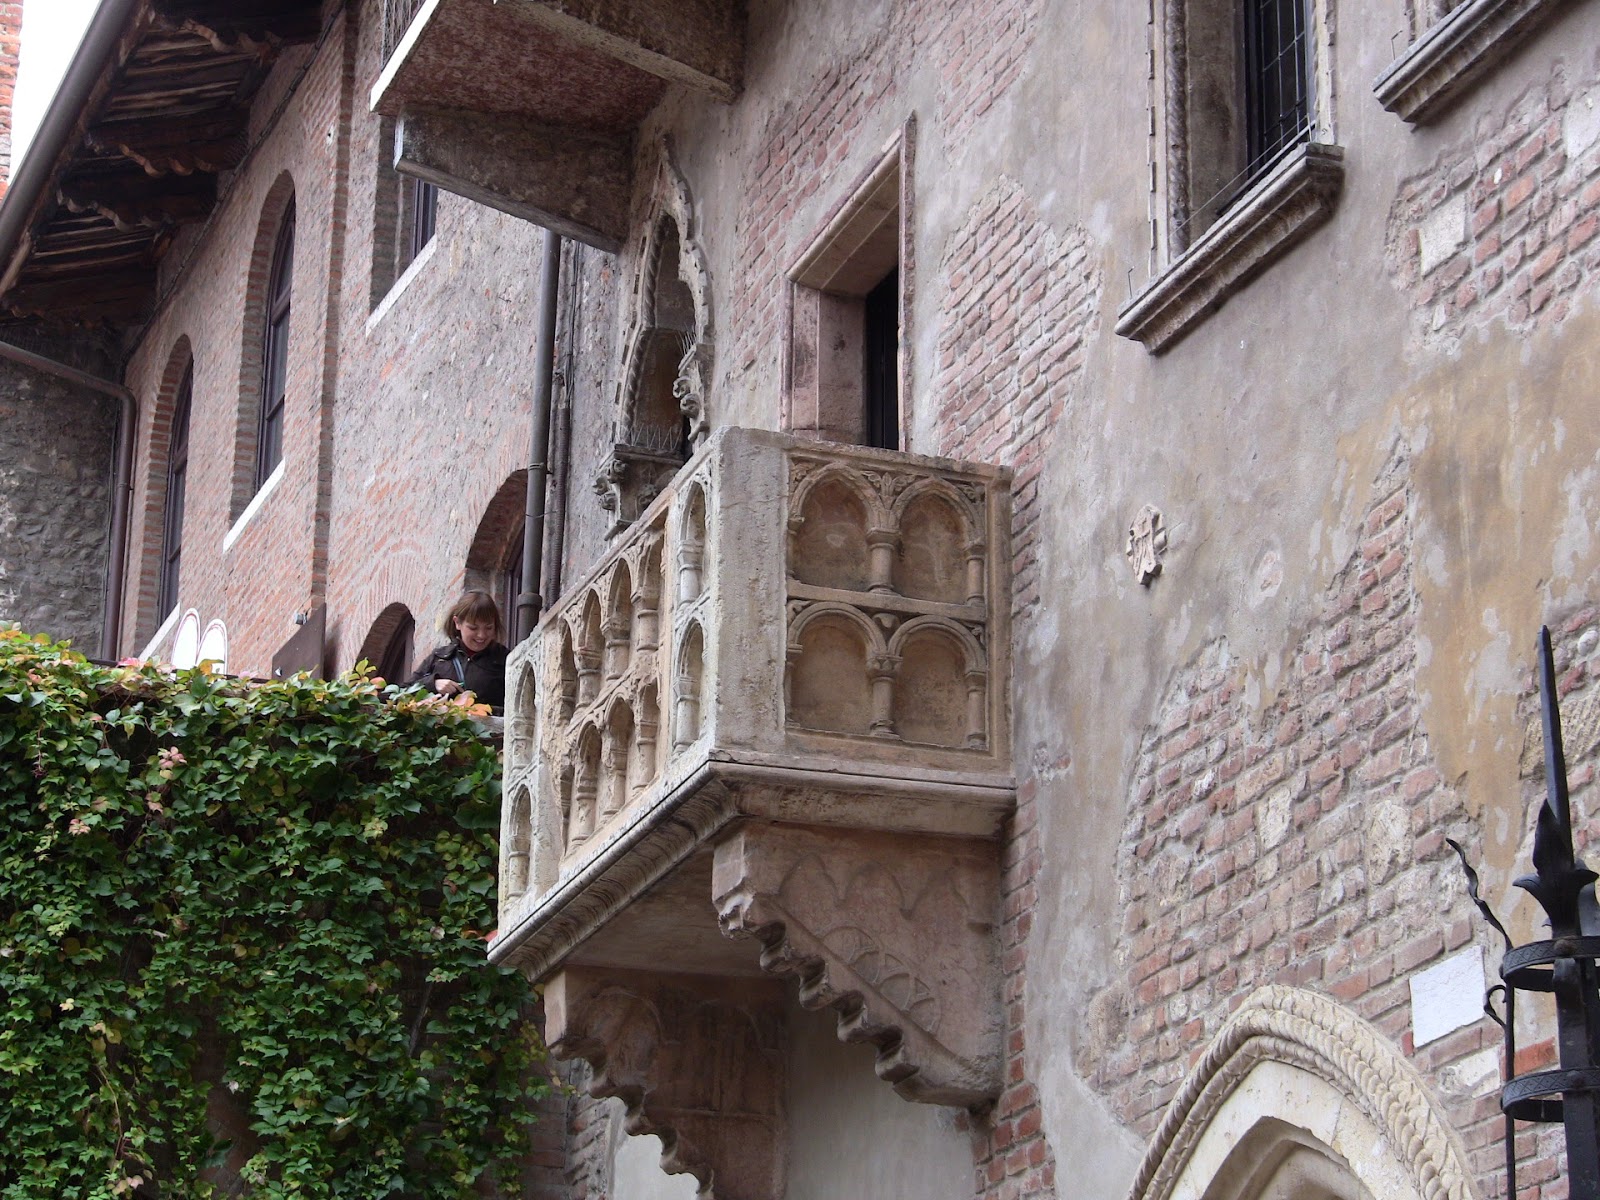 Don't be fooled by Juliet's balcony, it was added only recently in 1928 by the Verona City Council. Photo: Gail Keller, WineTrekkerTV.com